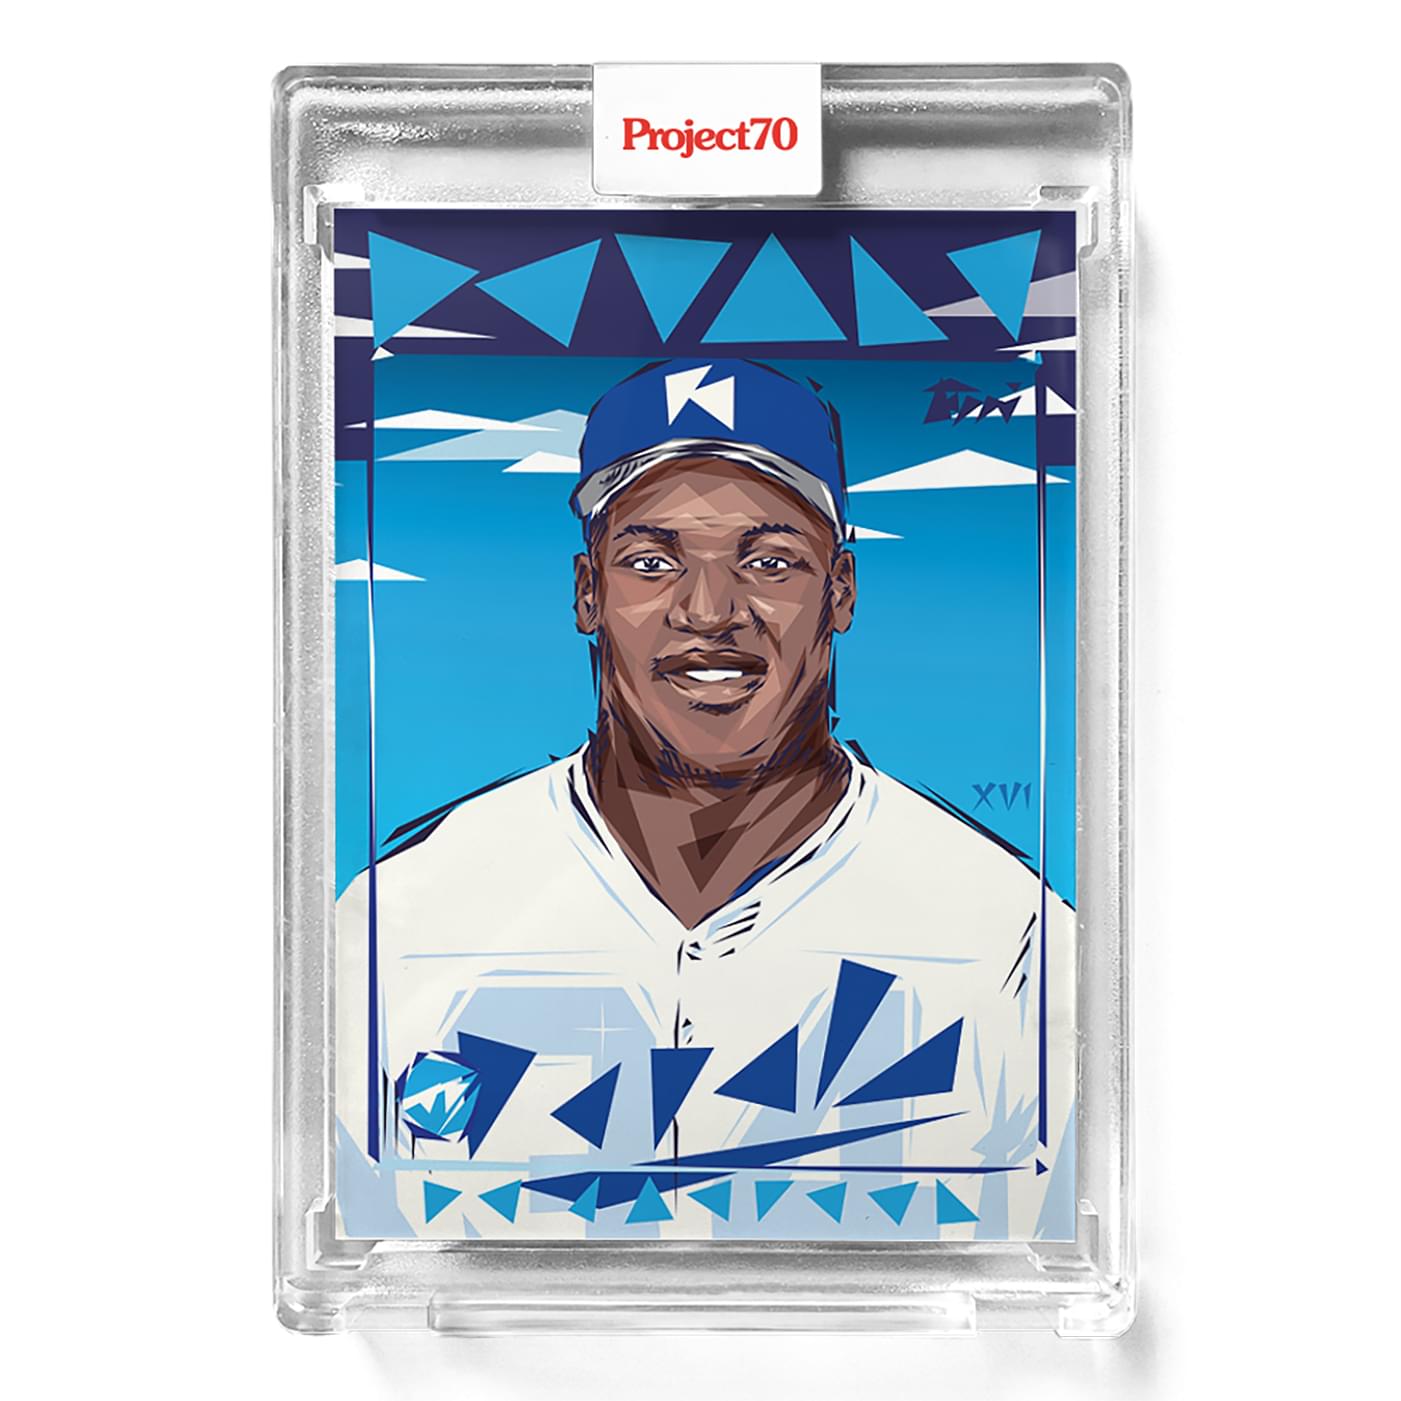 Topps Project70 Card 541 | 1986 Bo Jackson by Naturel